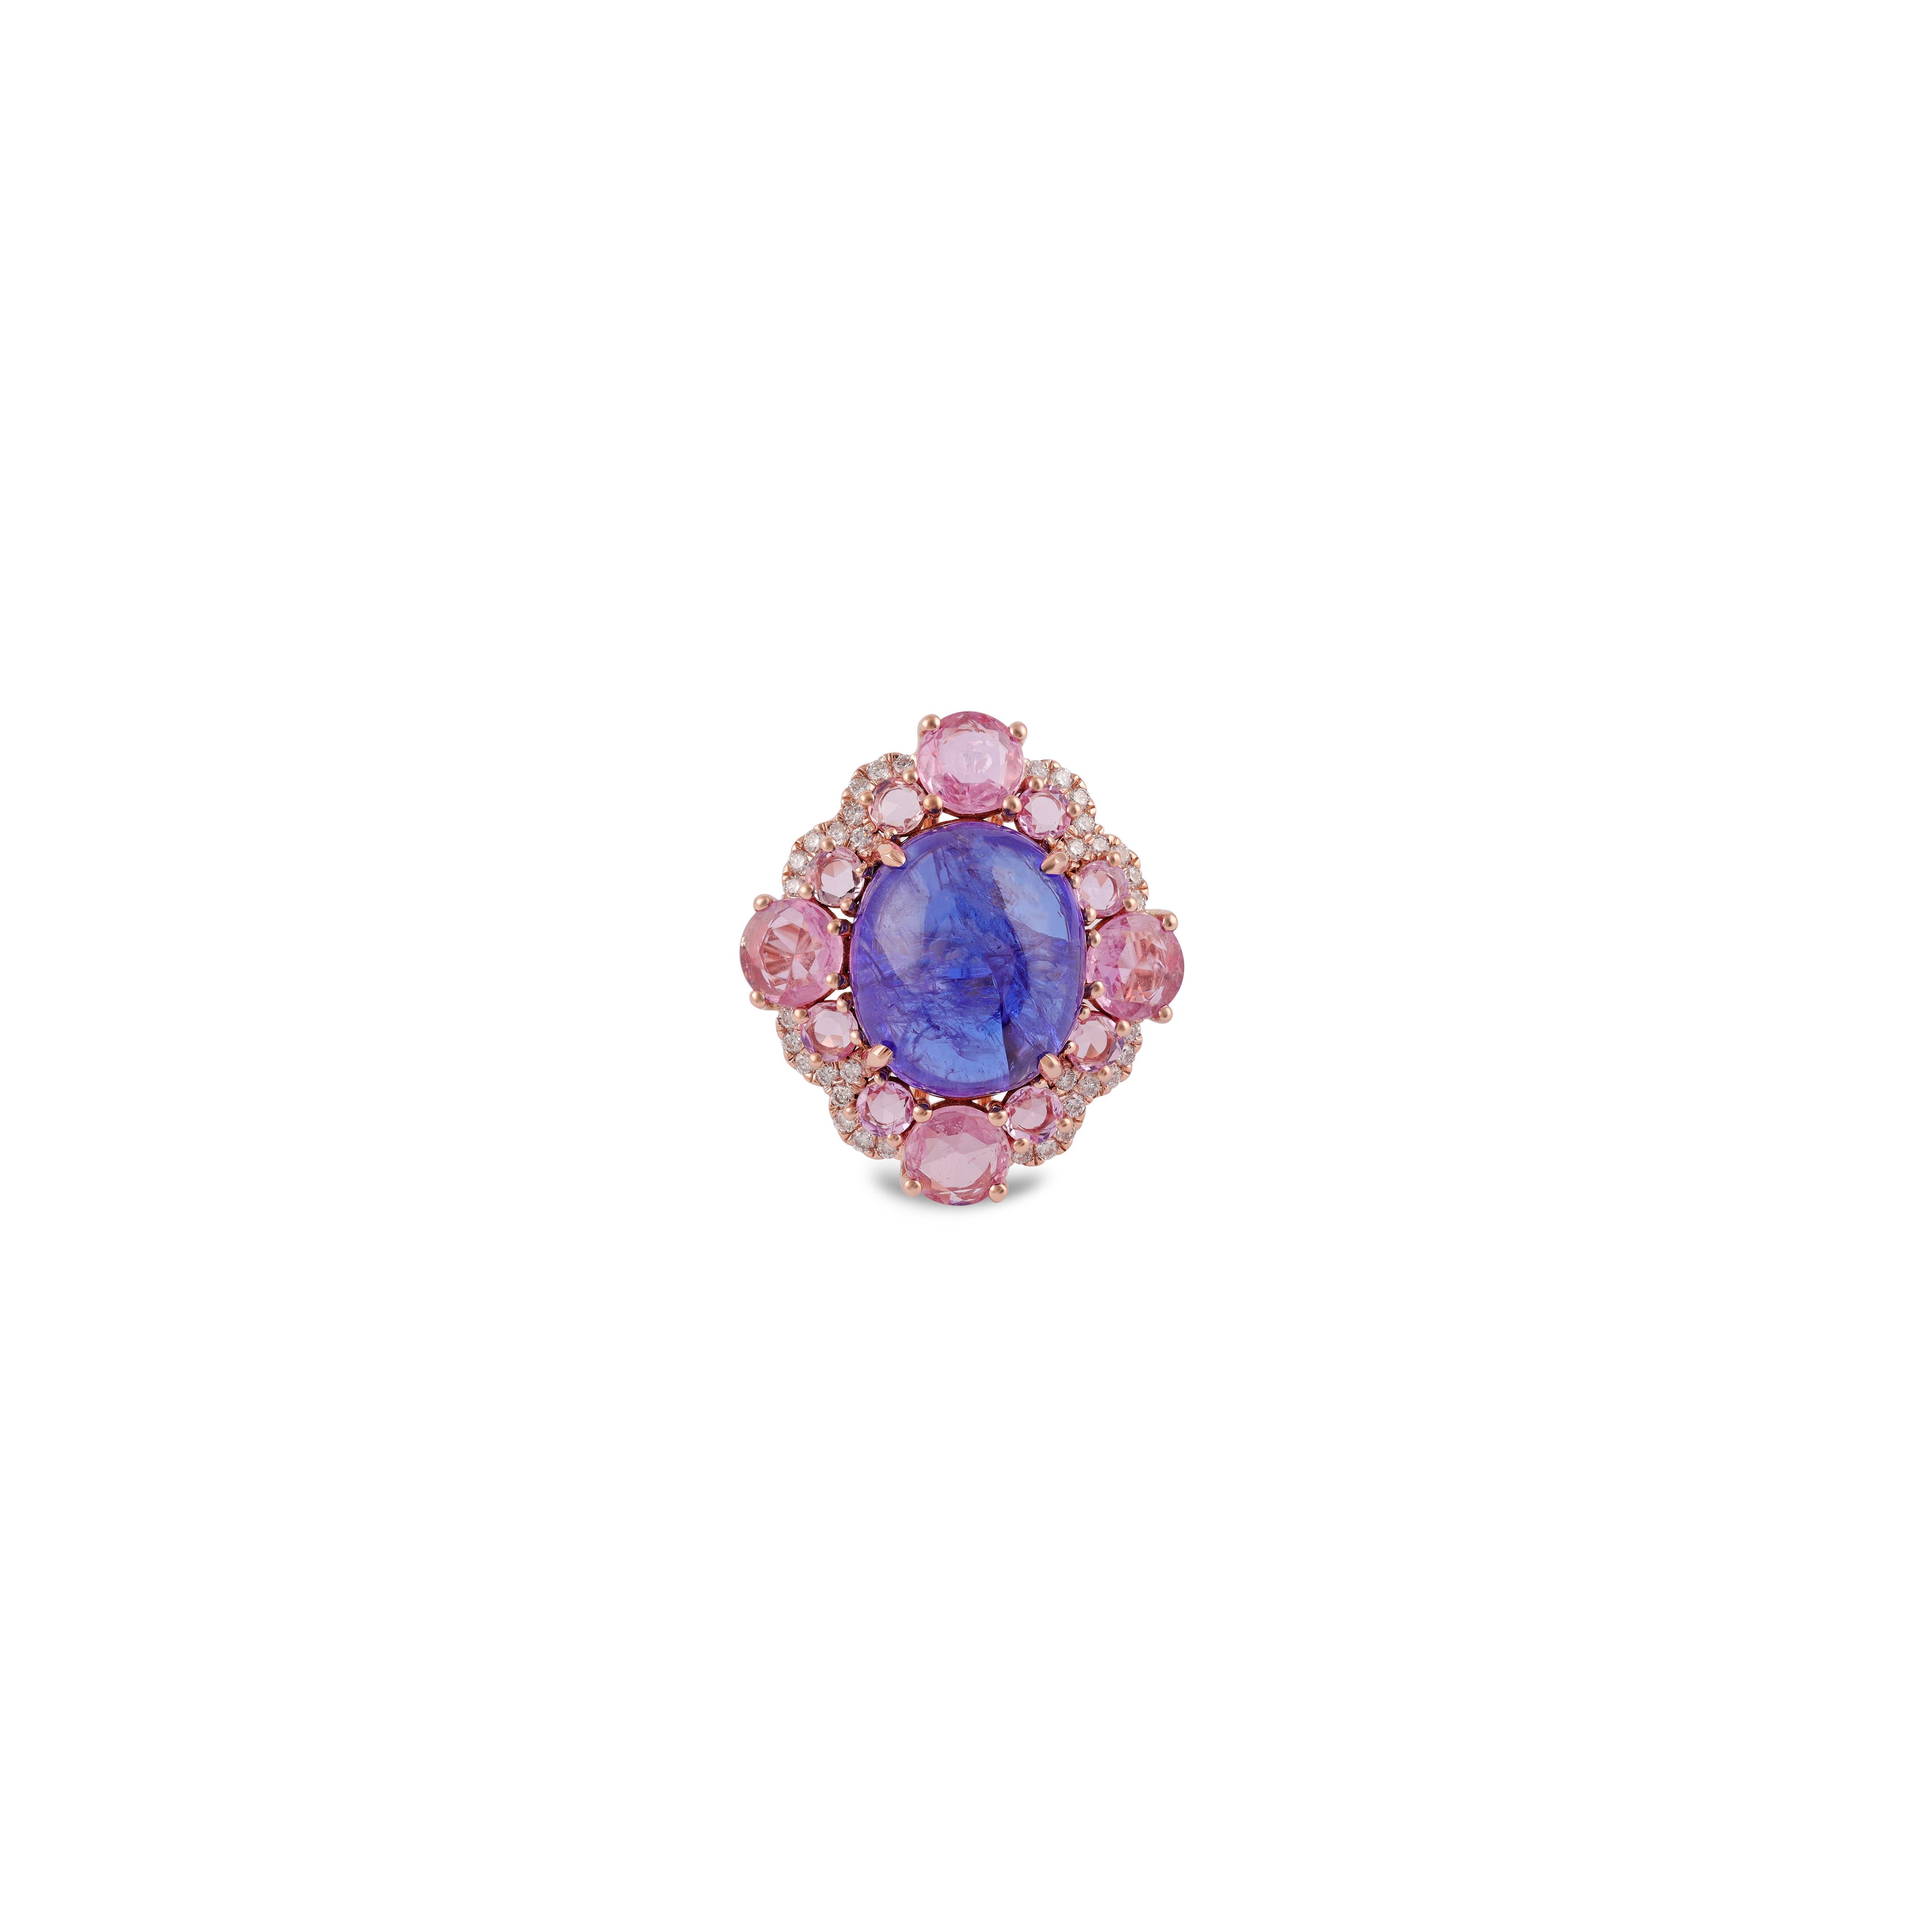 Tanzanite = 9.00 Carat
Sapphire = 2.36 Carats
Diamonds = 0.25 Carat
Metal: 5.65 gm 18K Rose Gold

Ring Size: 7* US

*It can be resized complimentary
